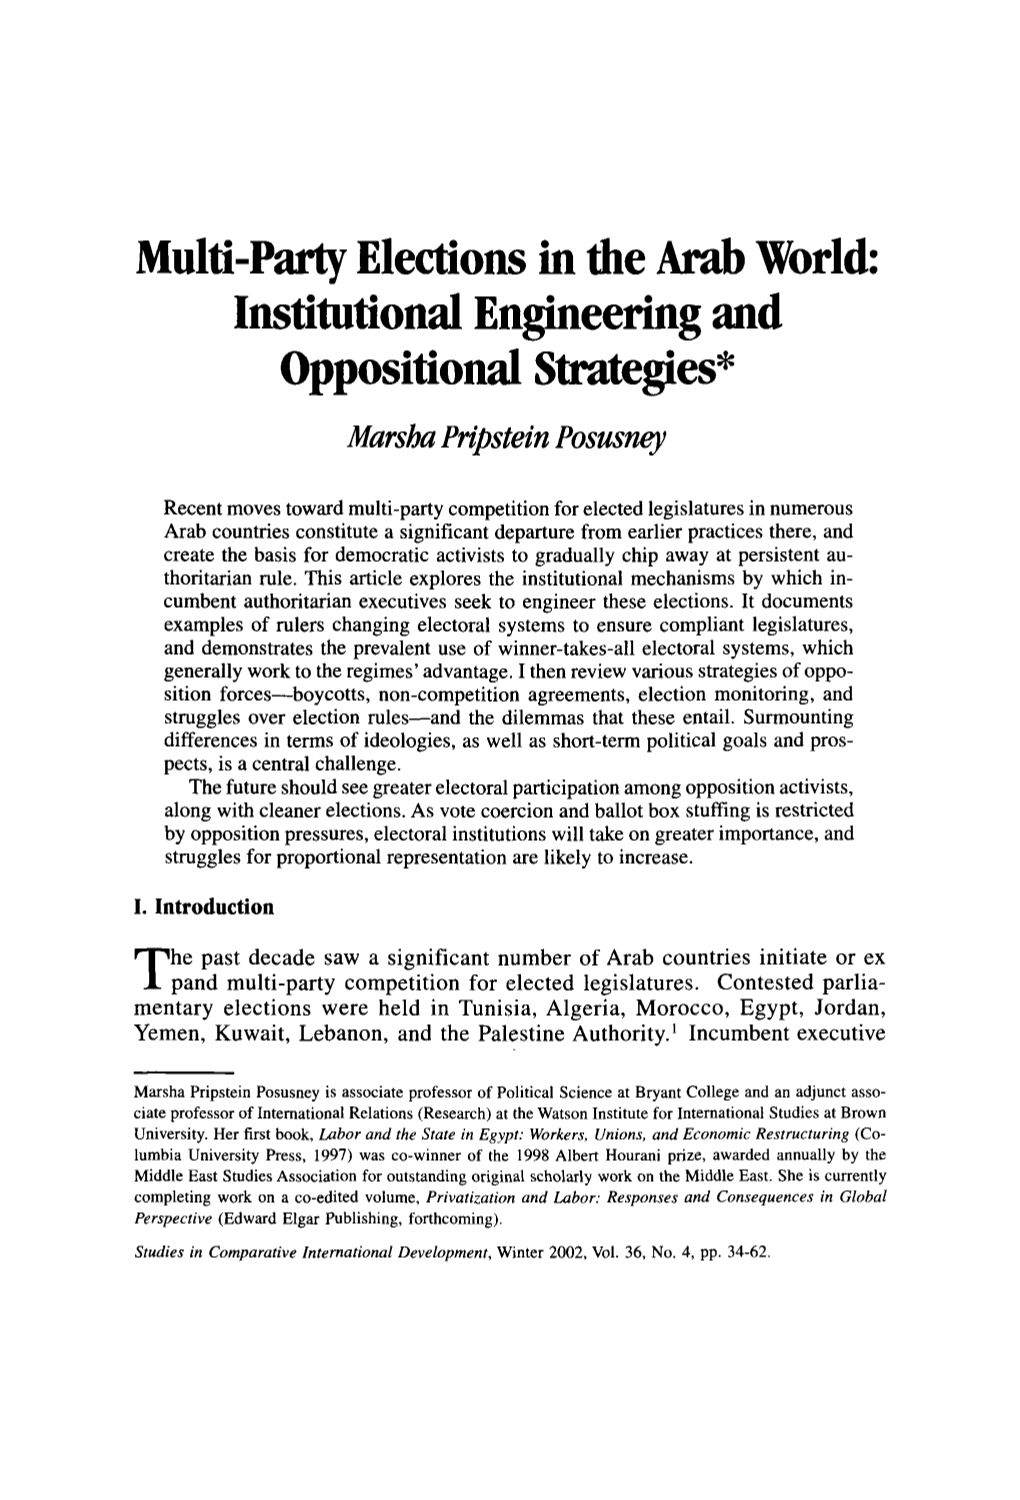 Multi-Party Elections in the Arab World: Institutional Engineering and Oppositional Strategies* Marsha Pripstein Posusney